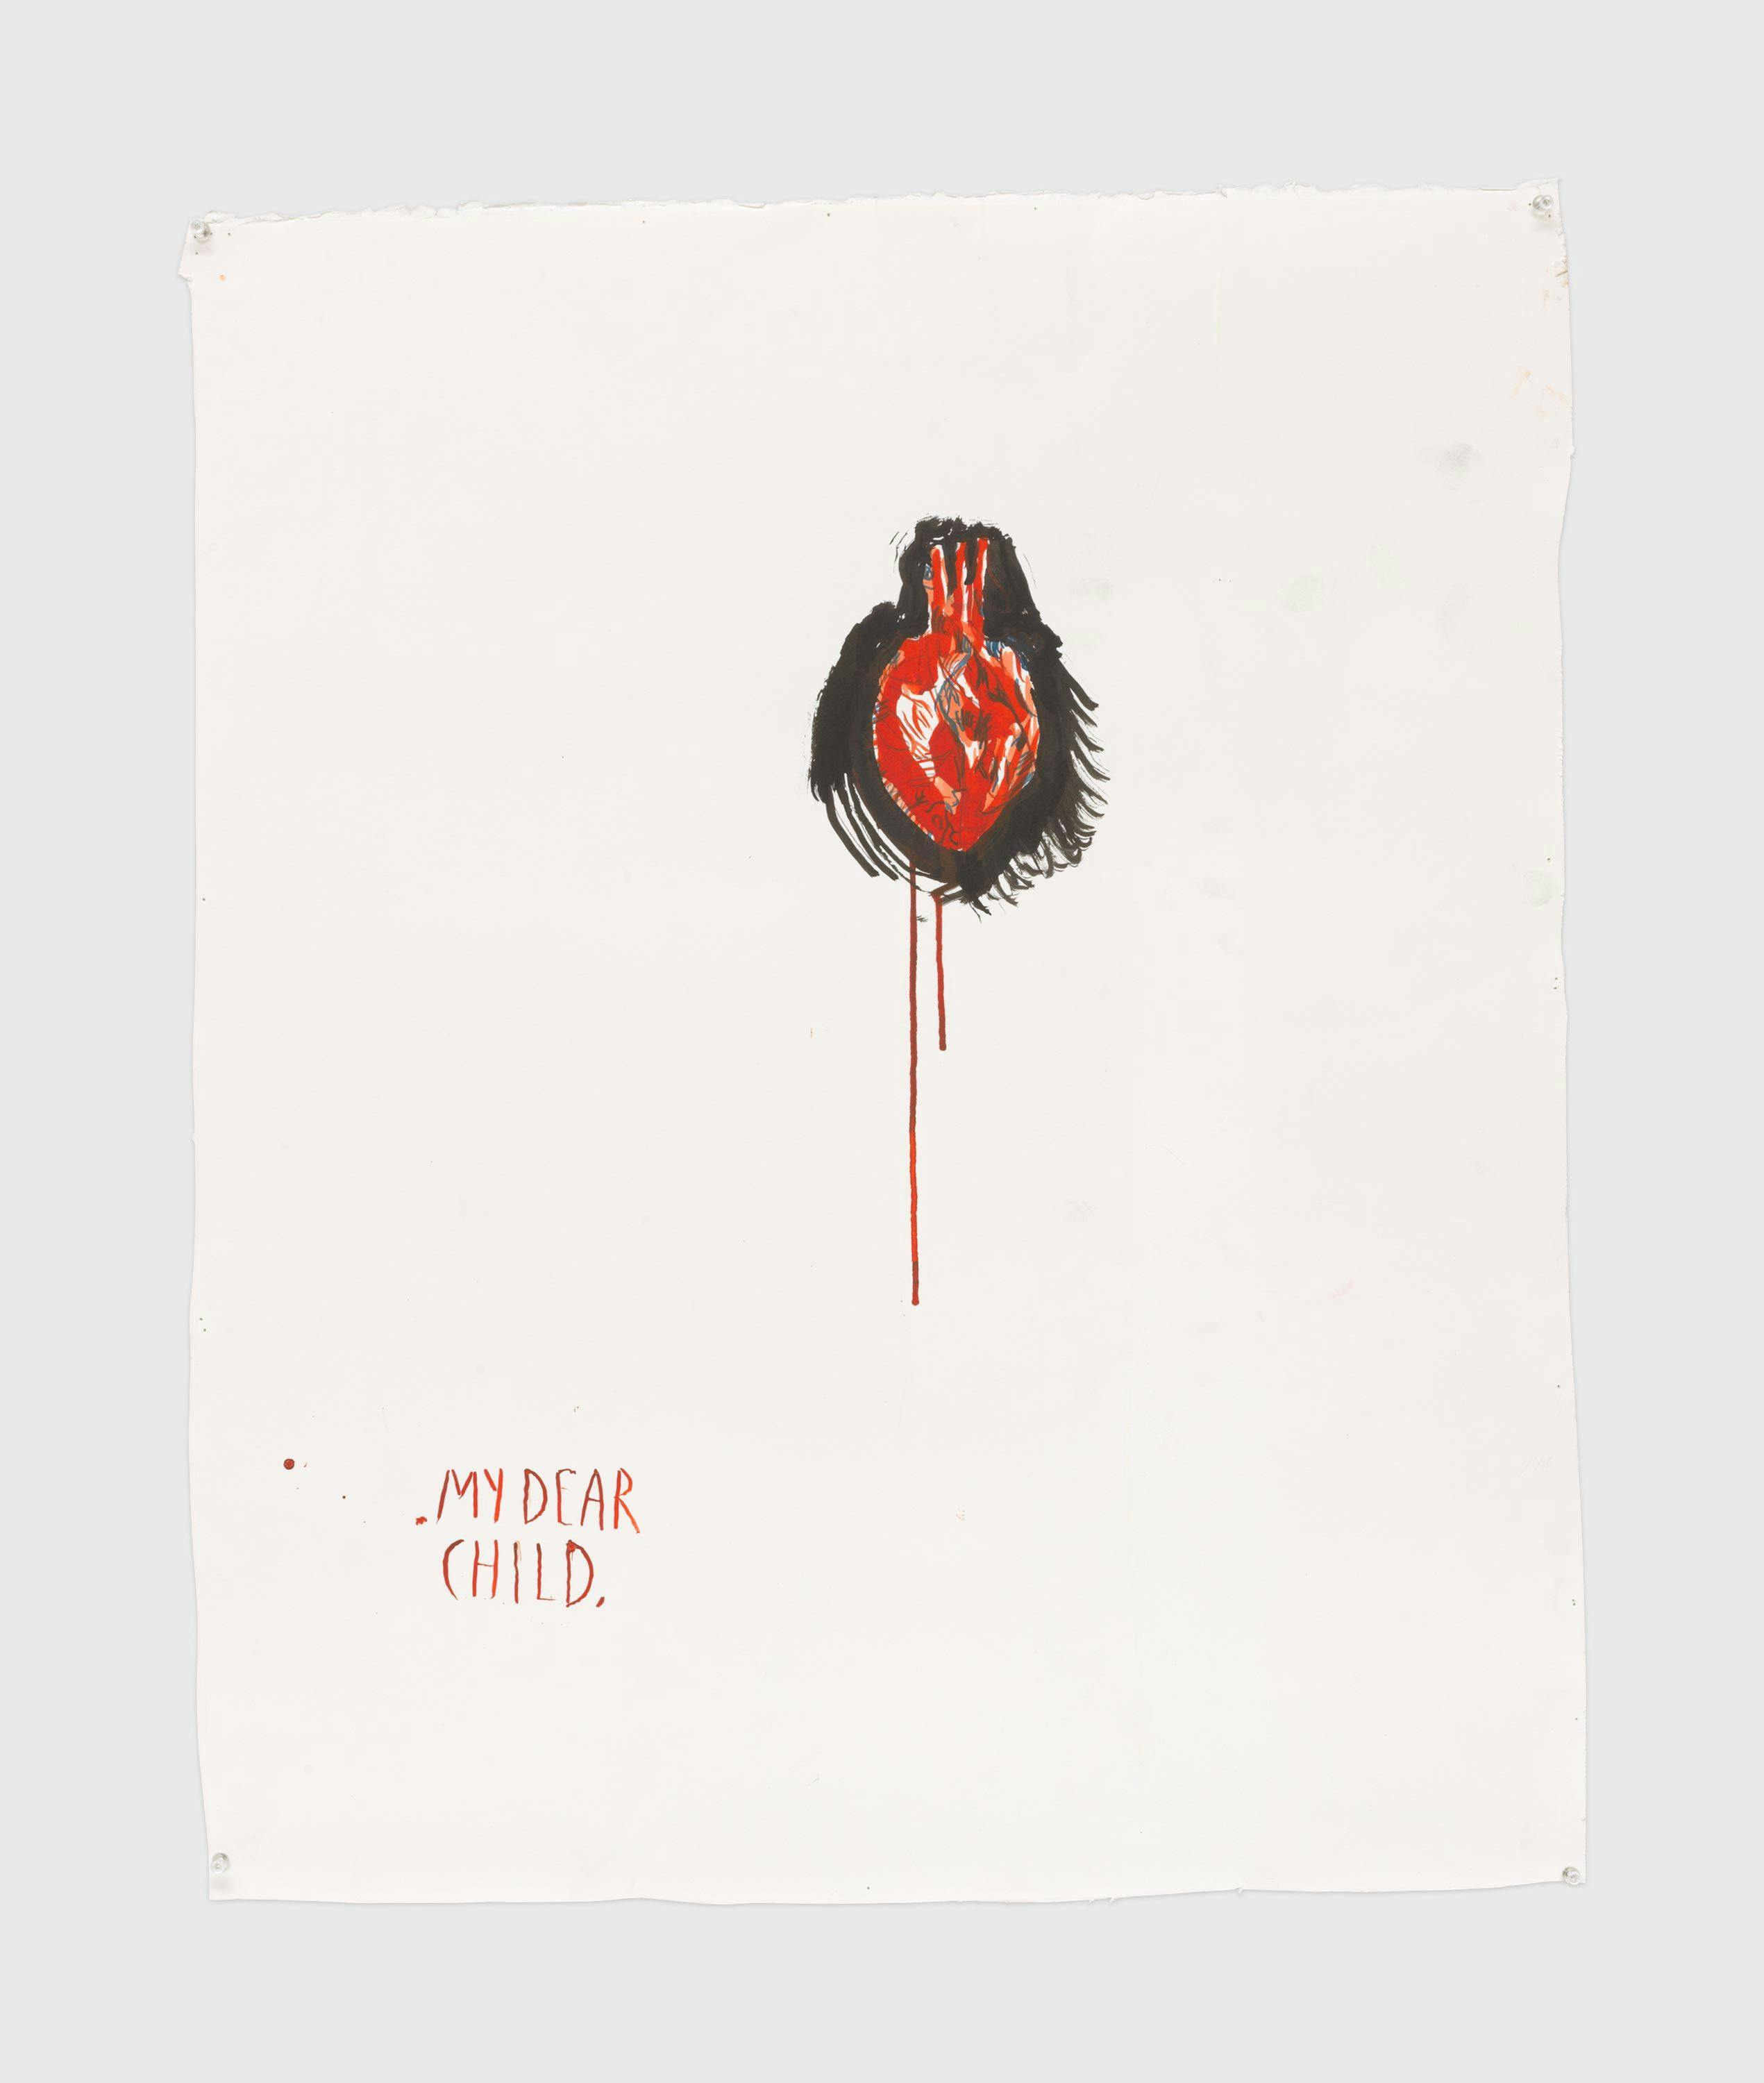 A work on paper by Raymond Pettibon, titled No Title (My dear child.), dated 2019.